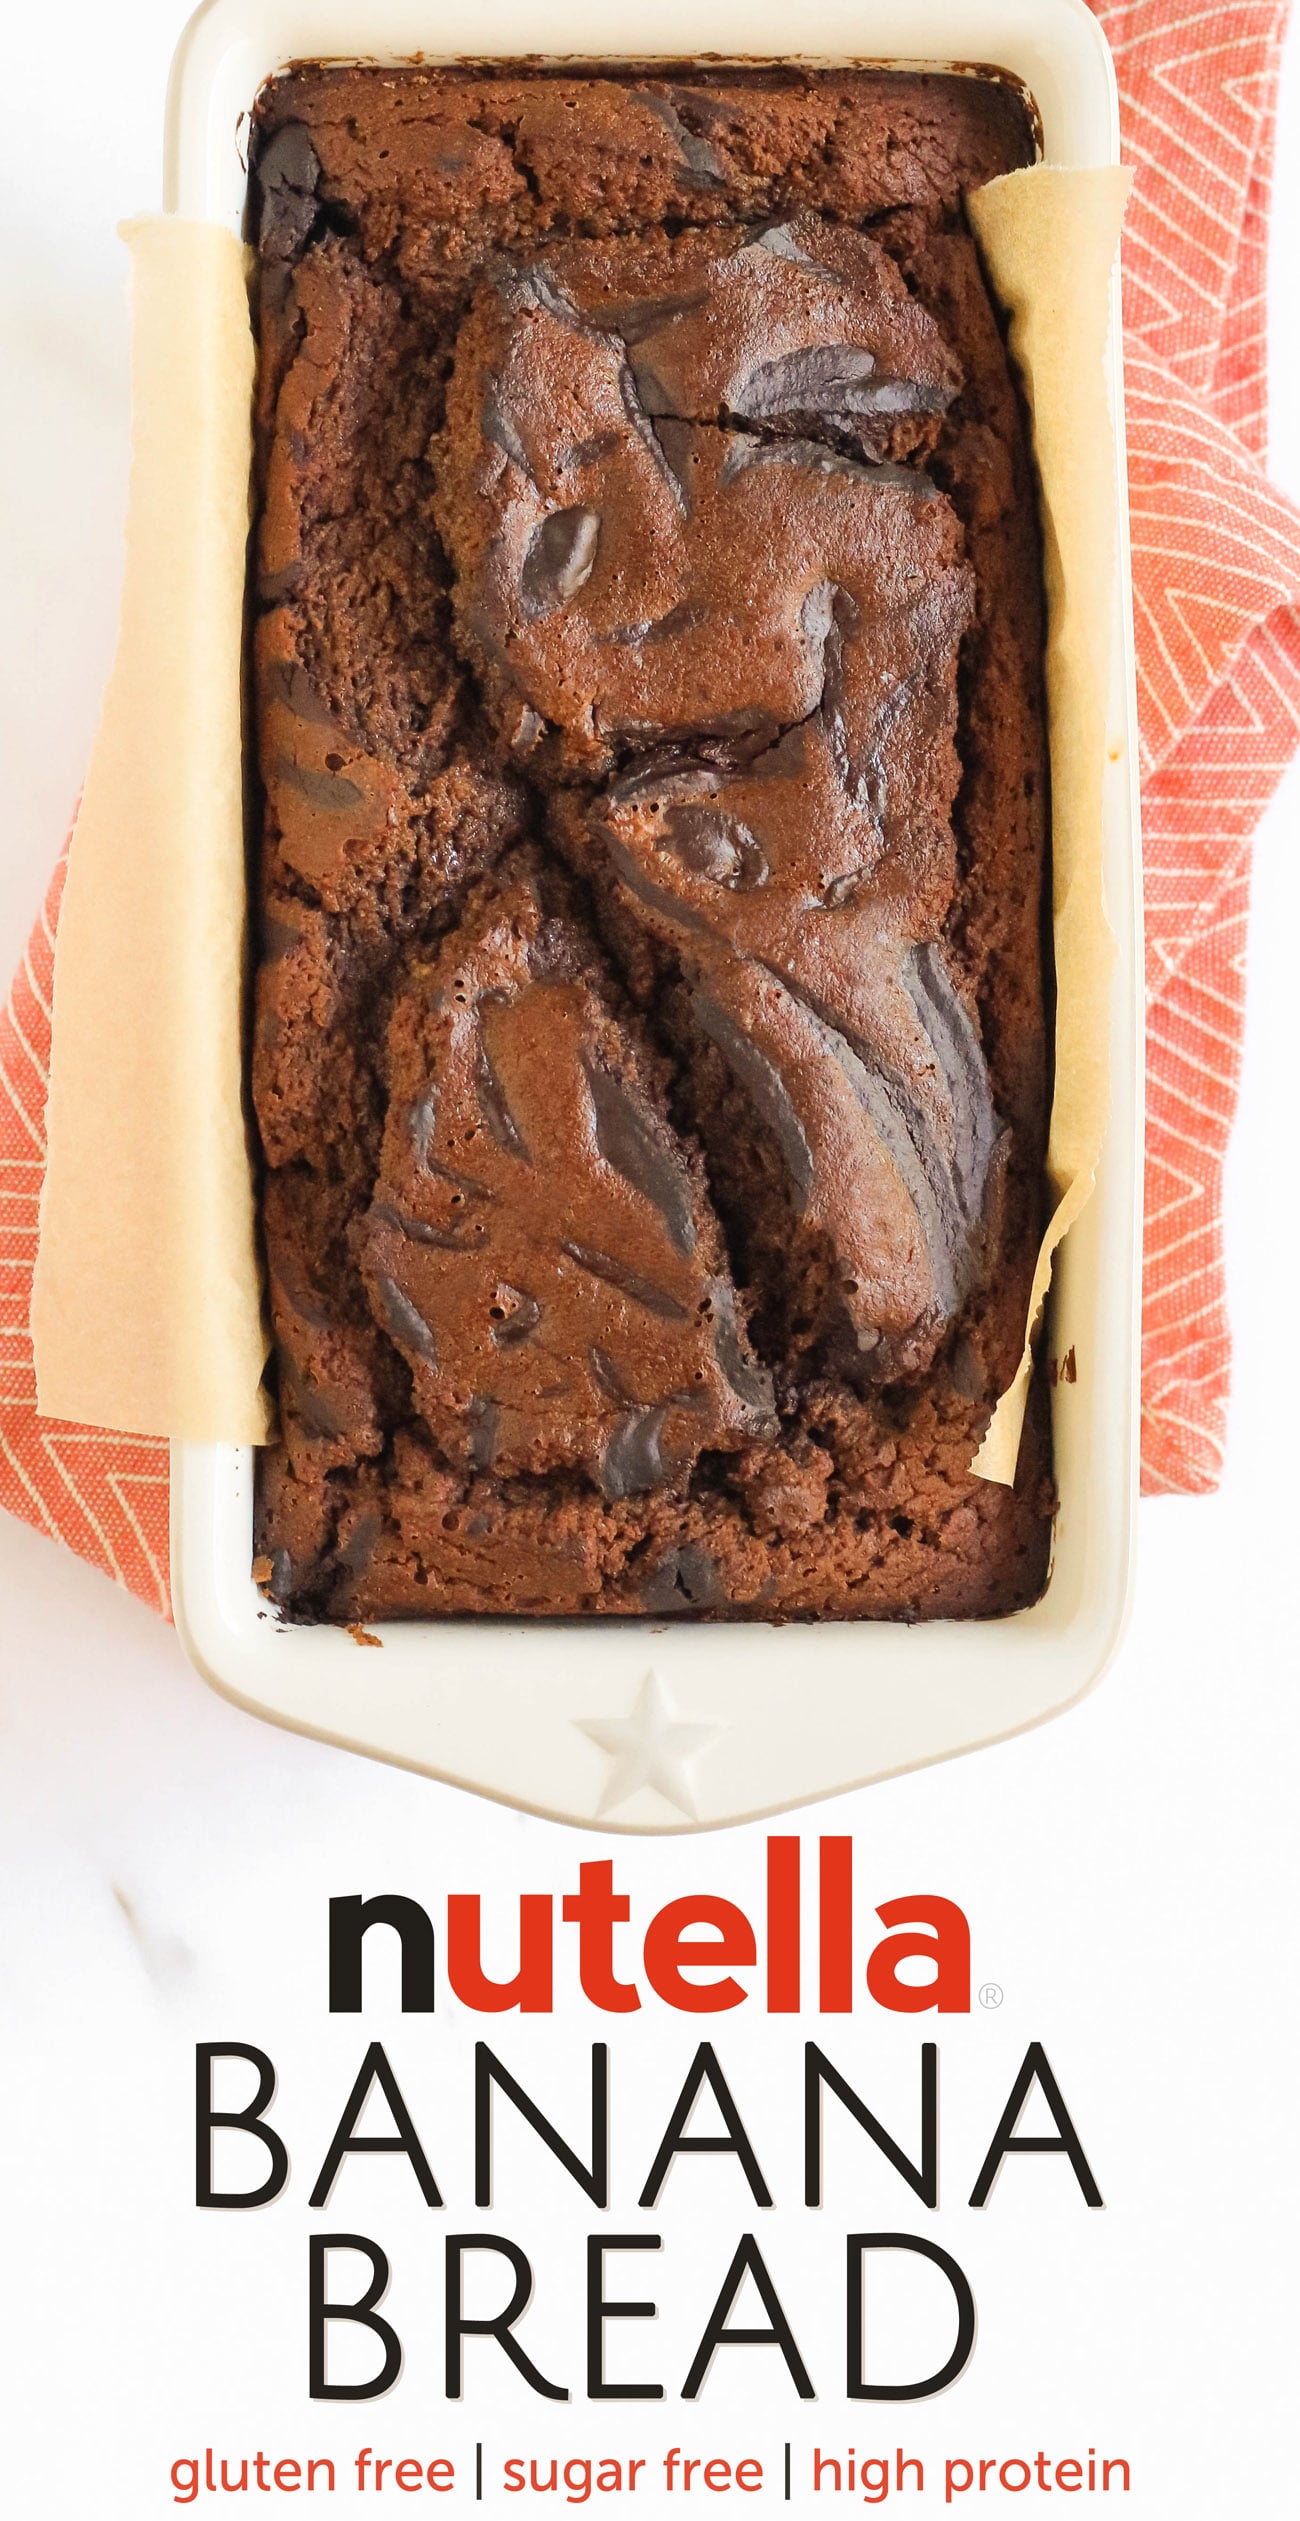 This Nutella Banana Bread is so moist, fluffy, springy, and chocolatey! It doesn't taste healthy, sugar free, gluten free, dairy free, high protein, or whole grain ONE BIT. It tastes like it's from a bakery! Made with low carb, paleo, and keto-friendly homemade Nutella!